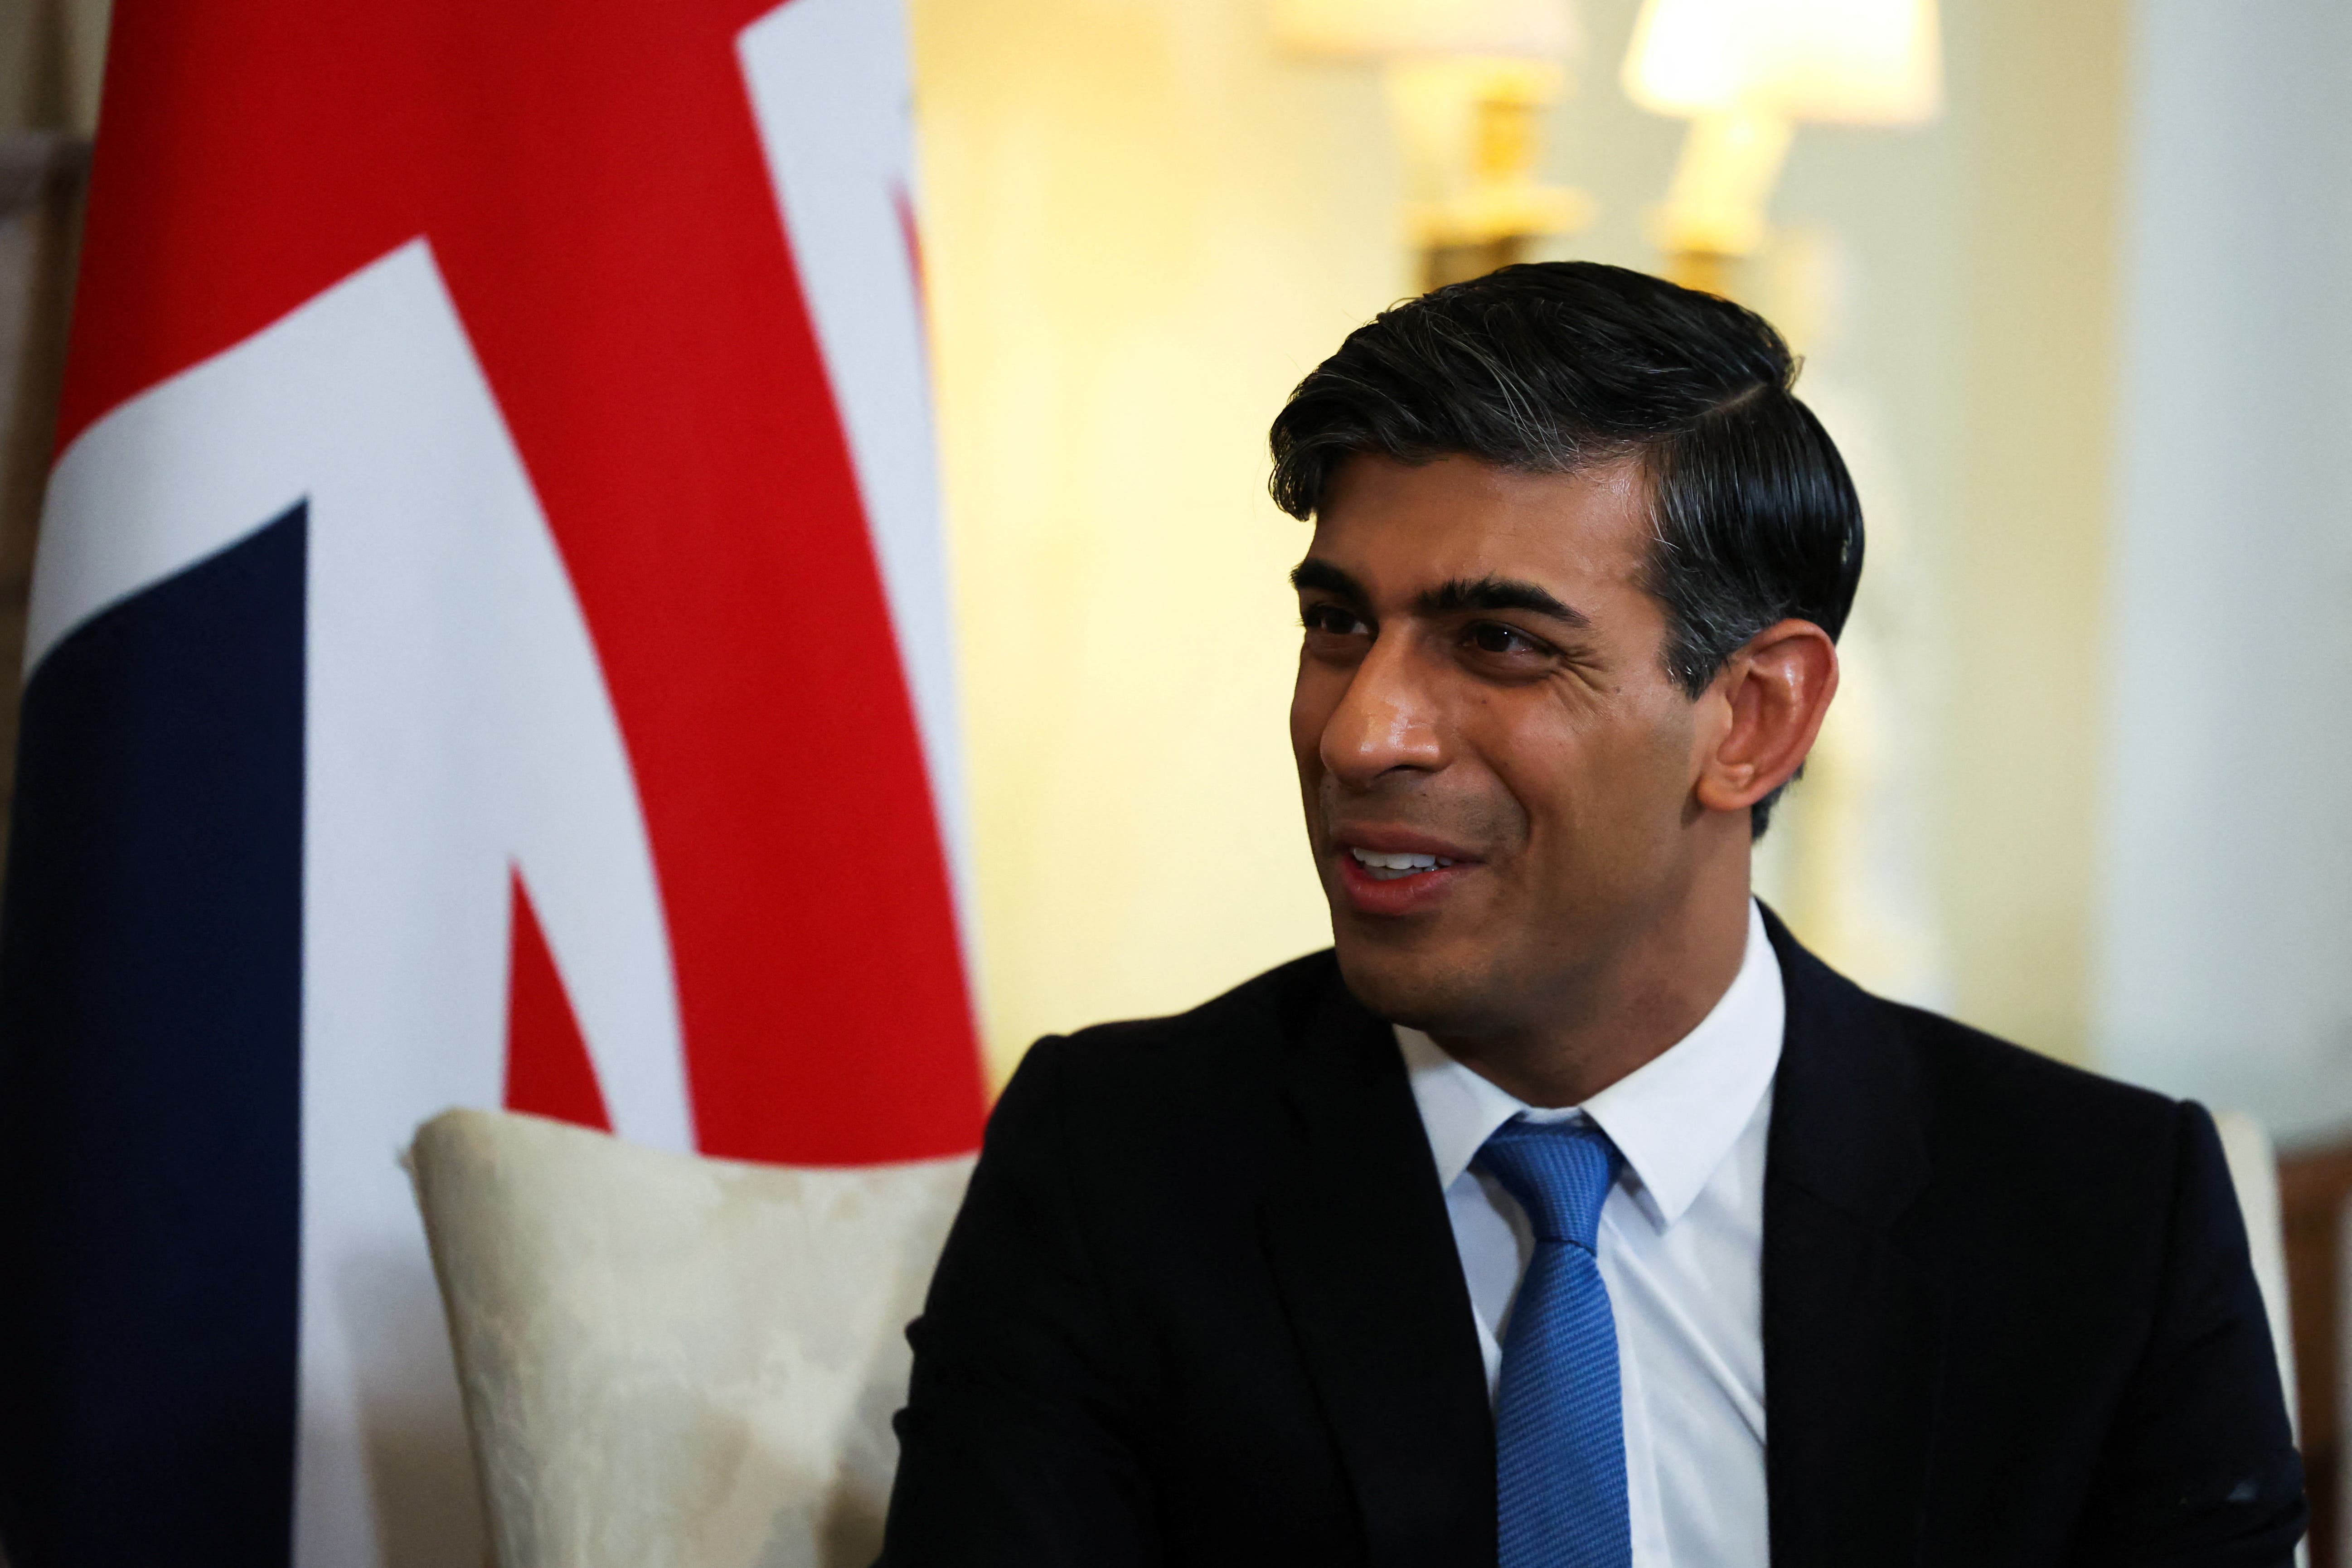 Rishi Sunak’s promise to grow the economy is in tatters after the UK entered a recession